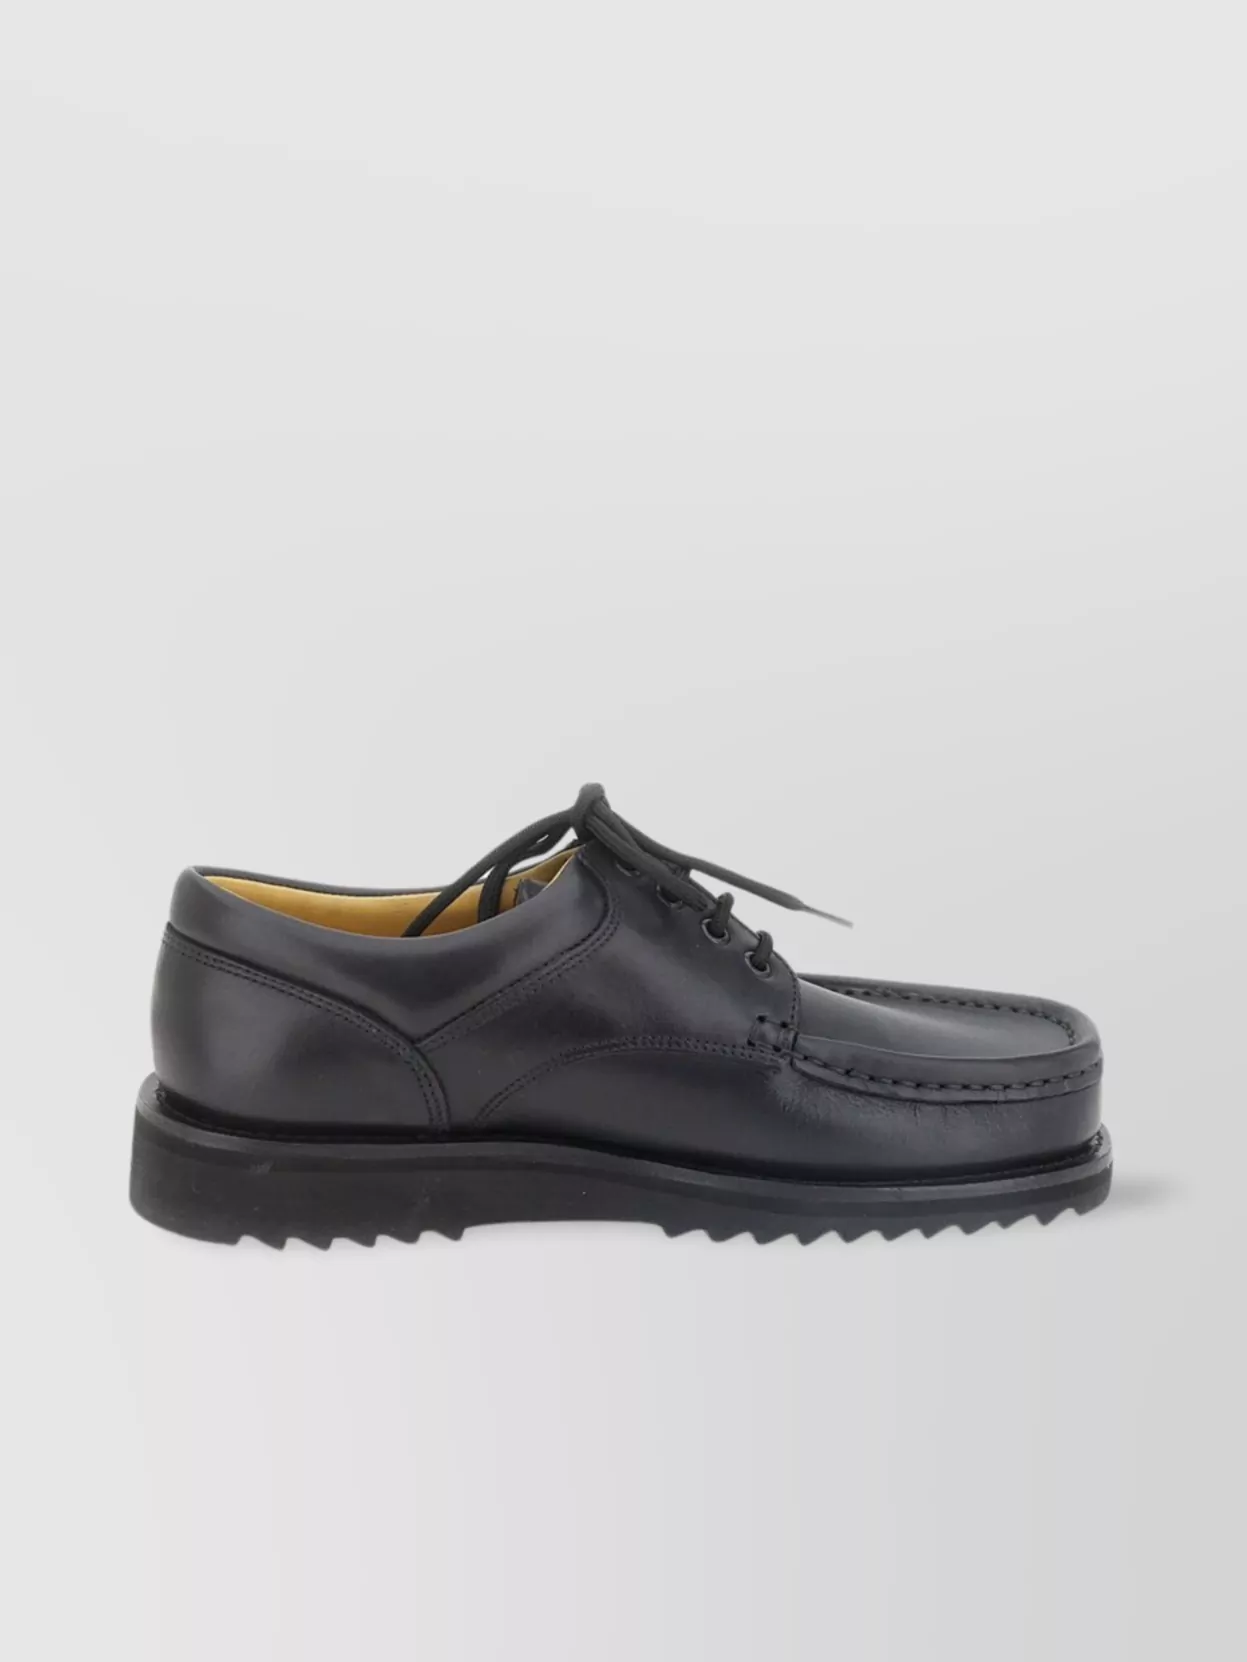 Paraboot Thiers/sport Chunky Sole Round Toe Stitched In Black